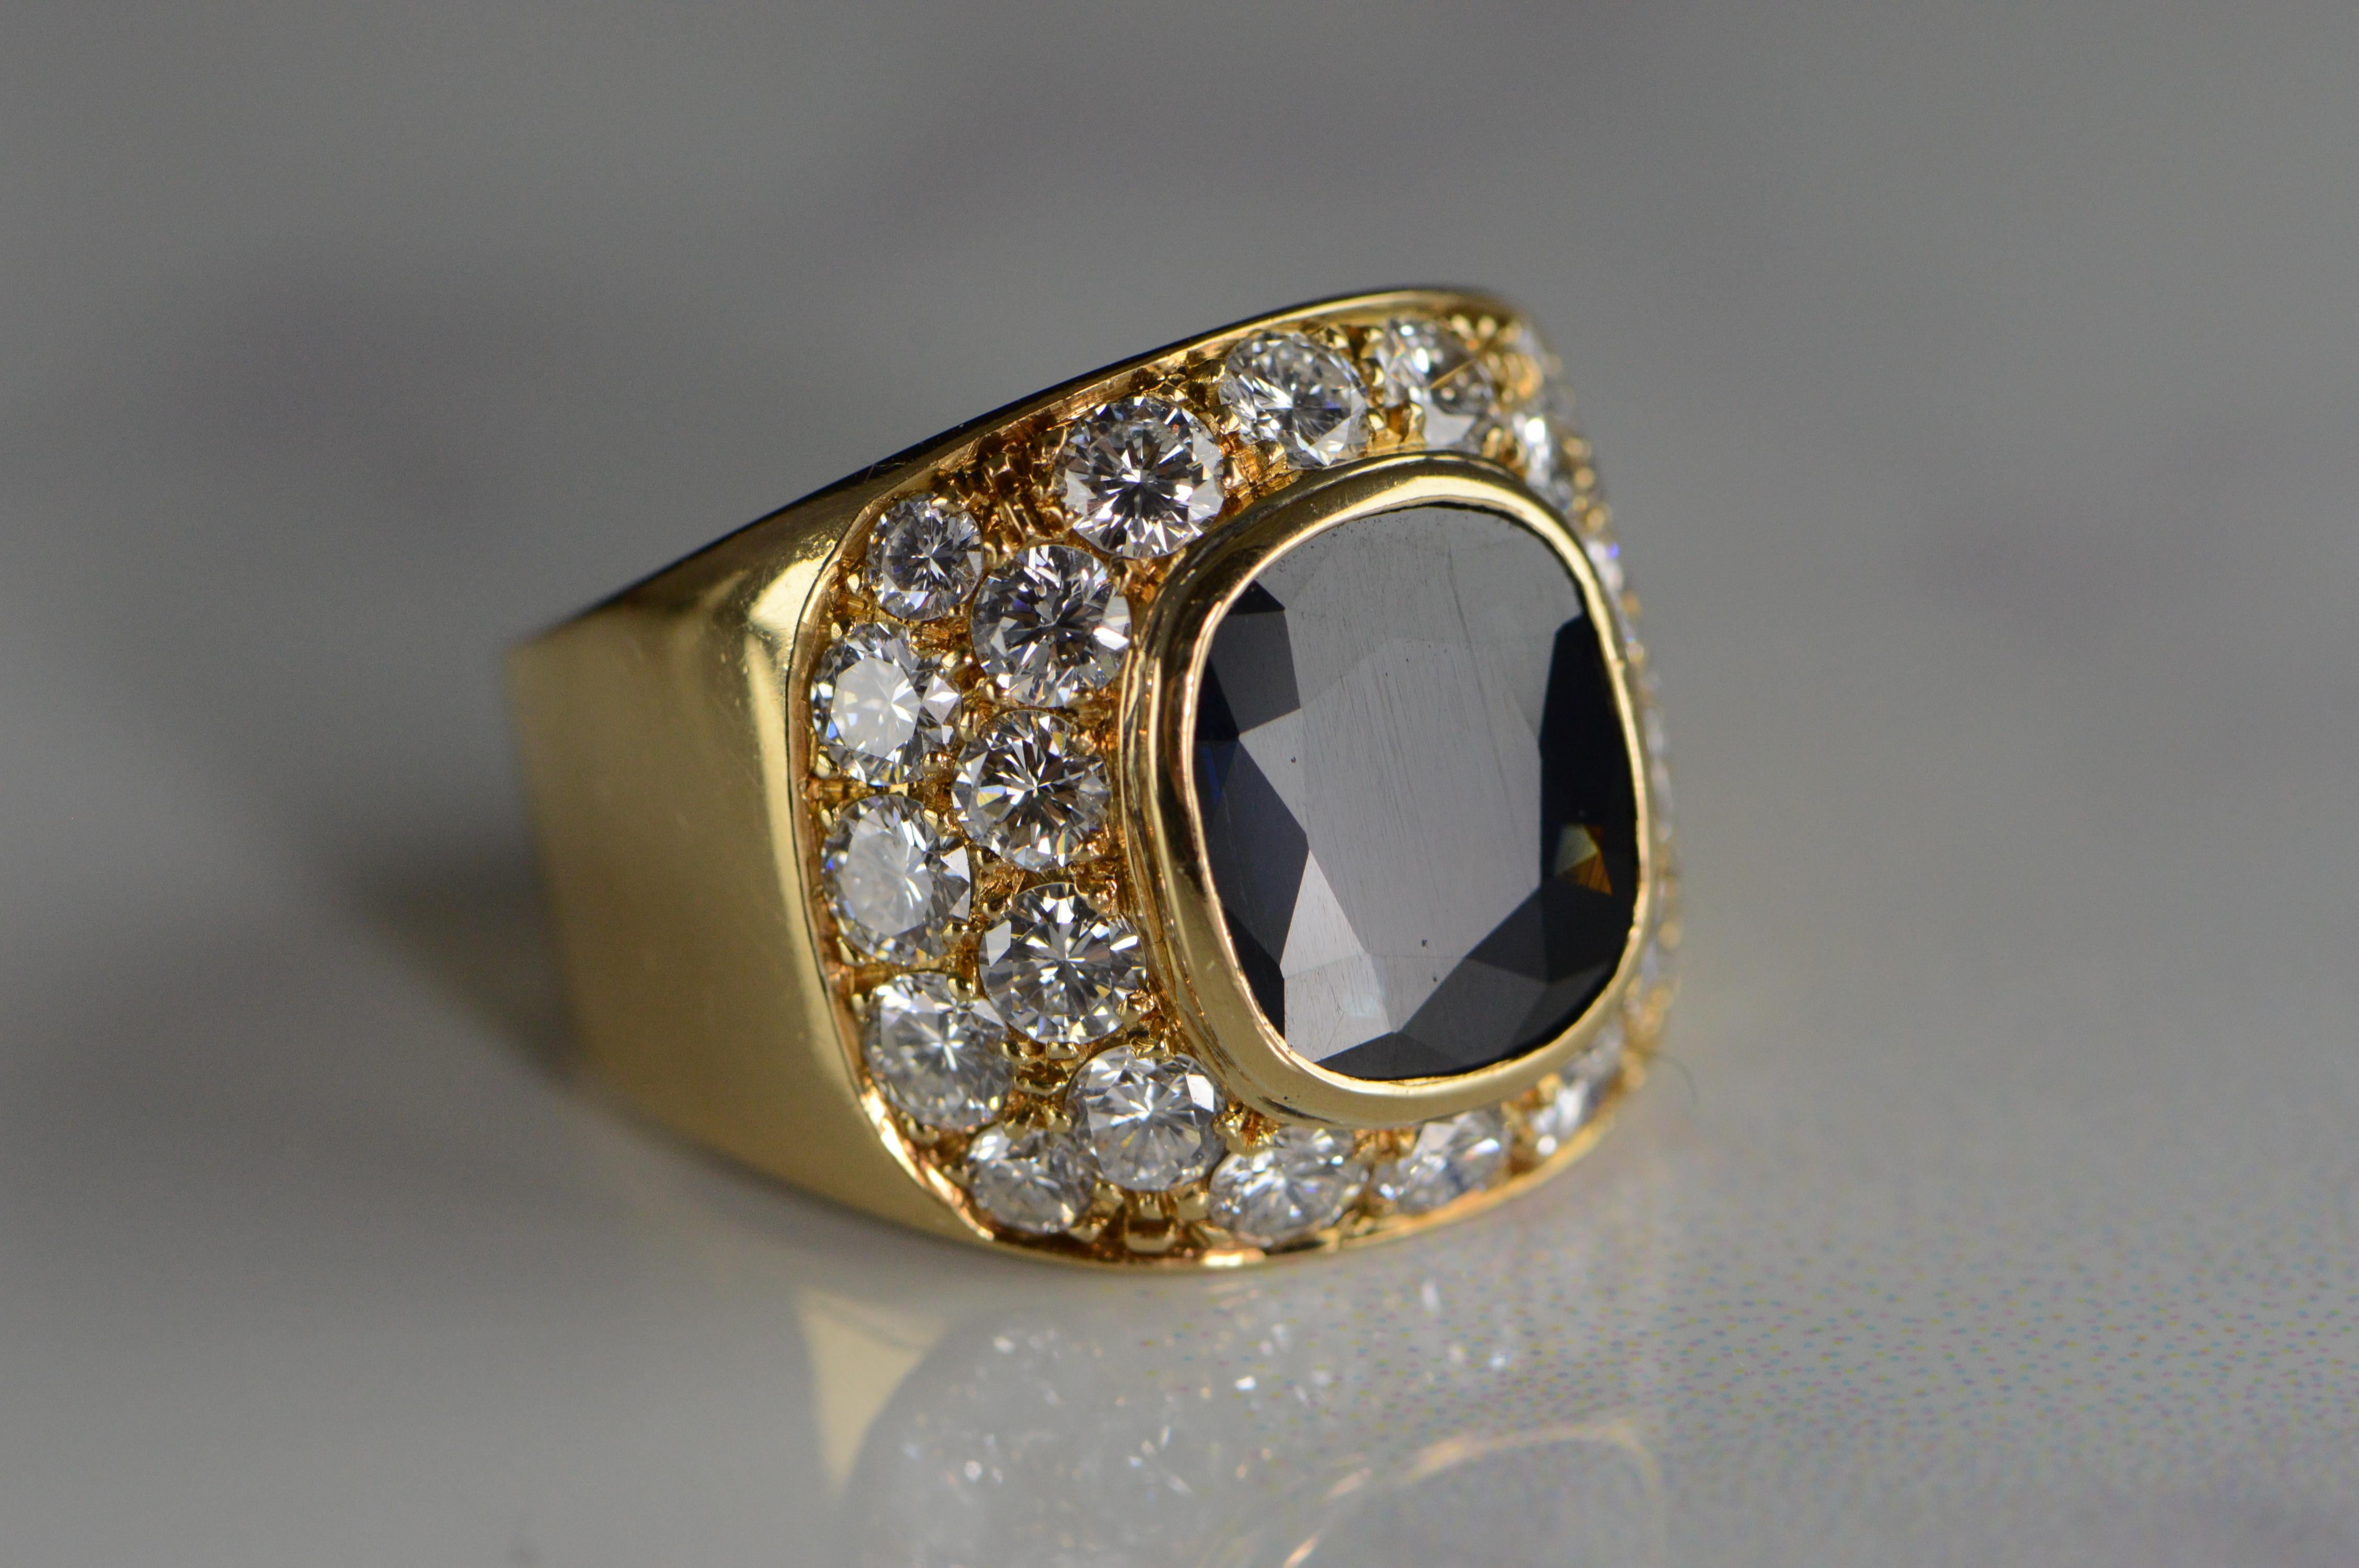 All diamonds are graded according to GIA grading standards.  
·Item: 18K 2.85 CT Sapphire 1.92 CTW Diamond Ring - Size 6 / Yellow Gold  
·Era: Modern / 1970s  
·Composition: 18k Gold Marked / Tested  
·Gem Stone: 24x Diamonds=1.92ctw G/VS, 2.85ct